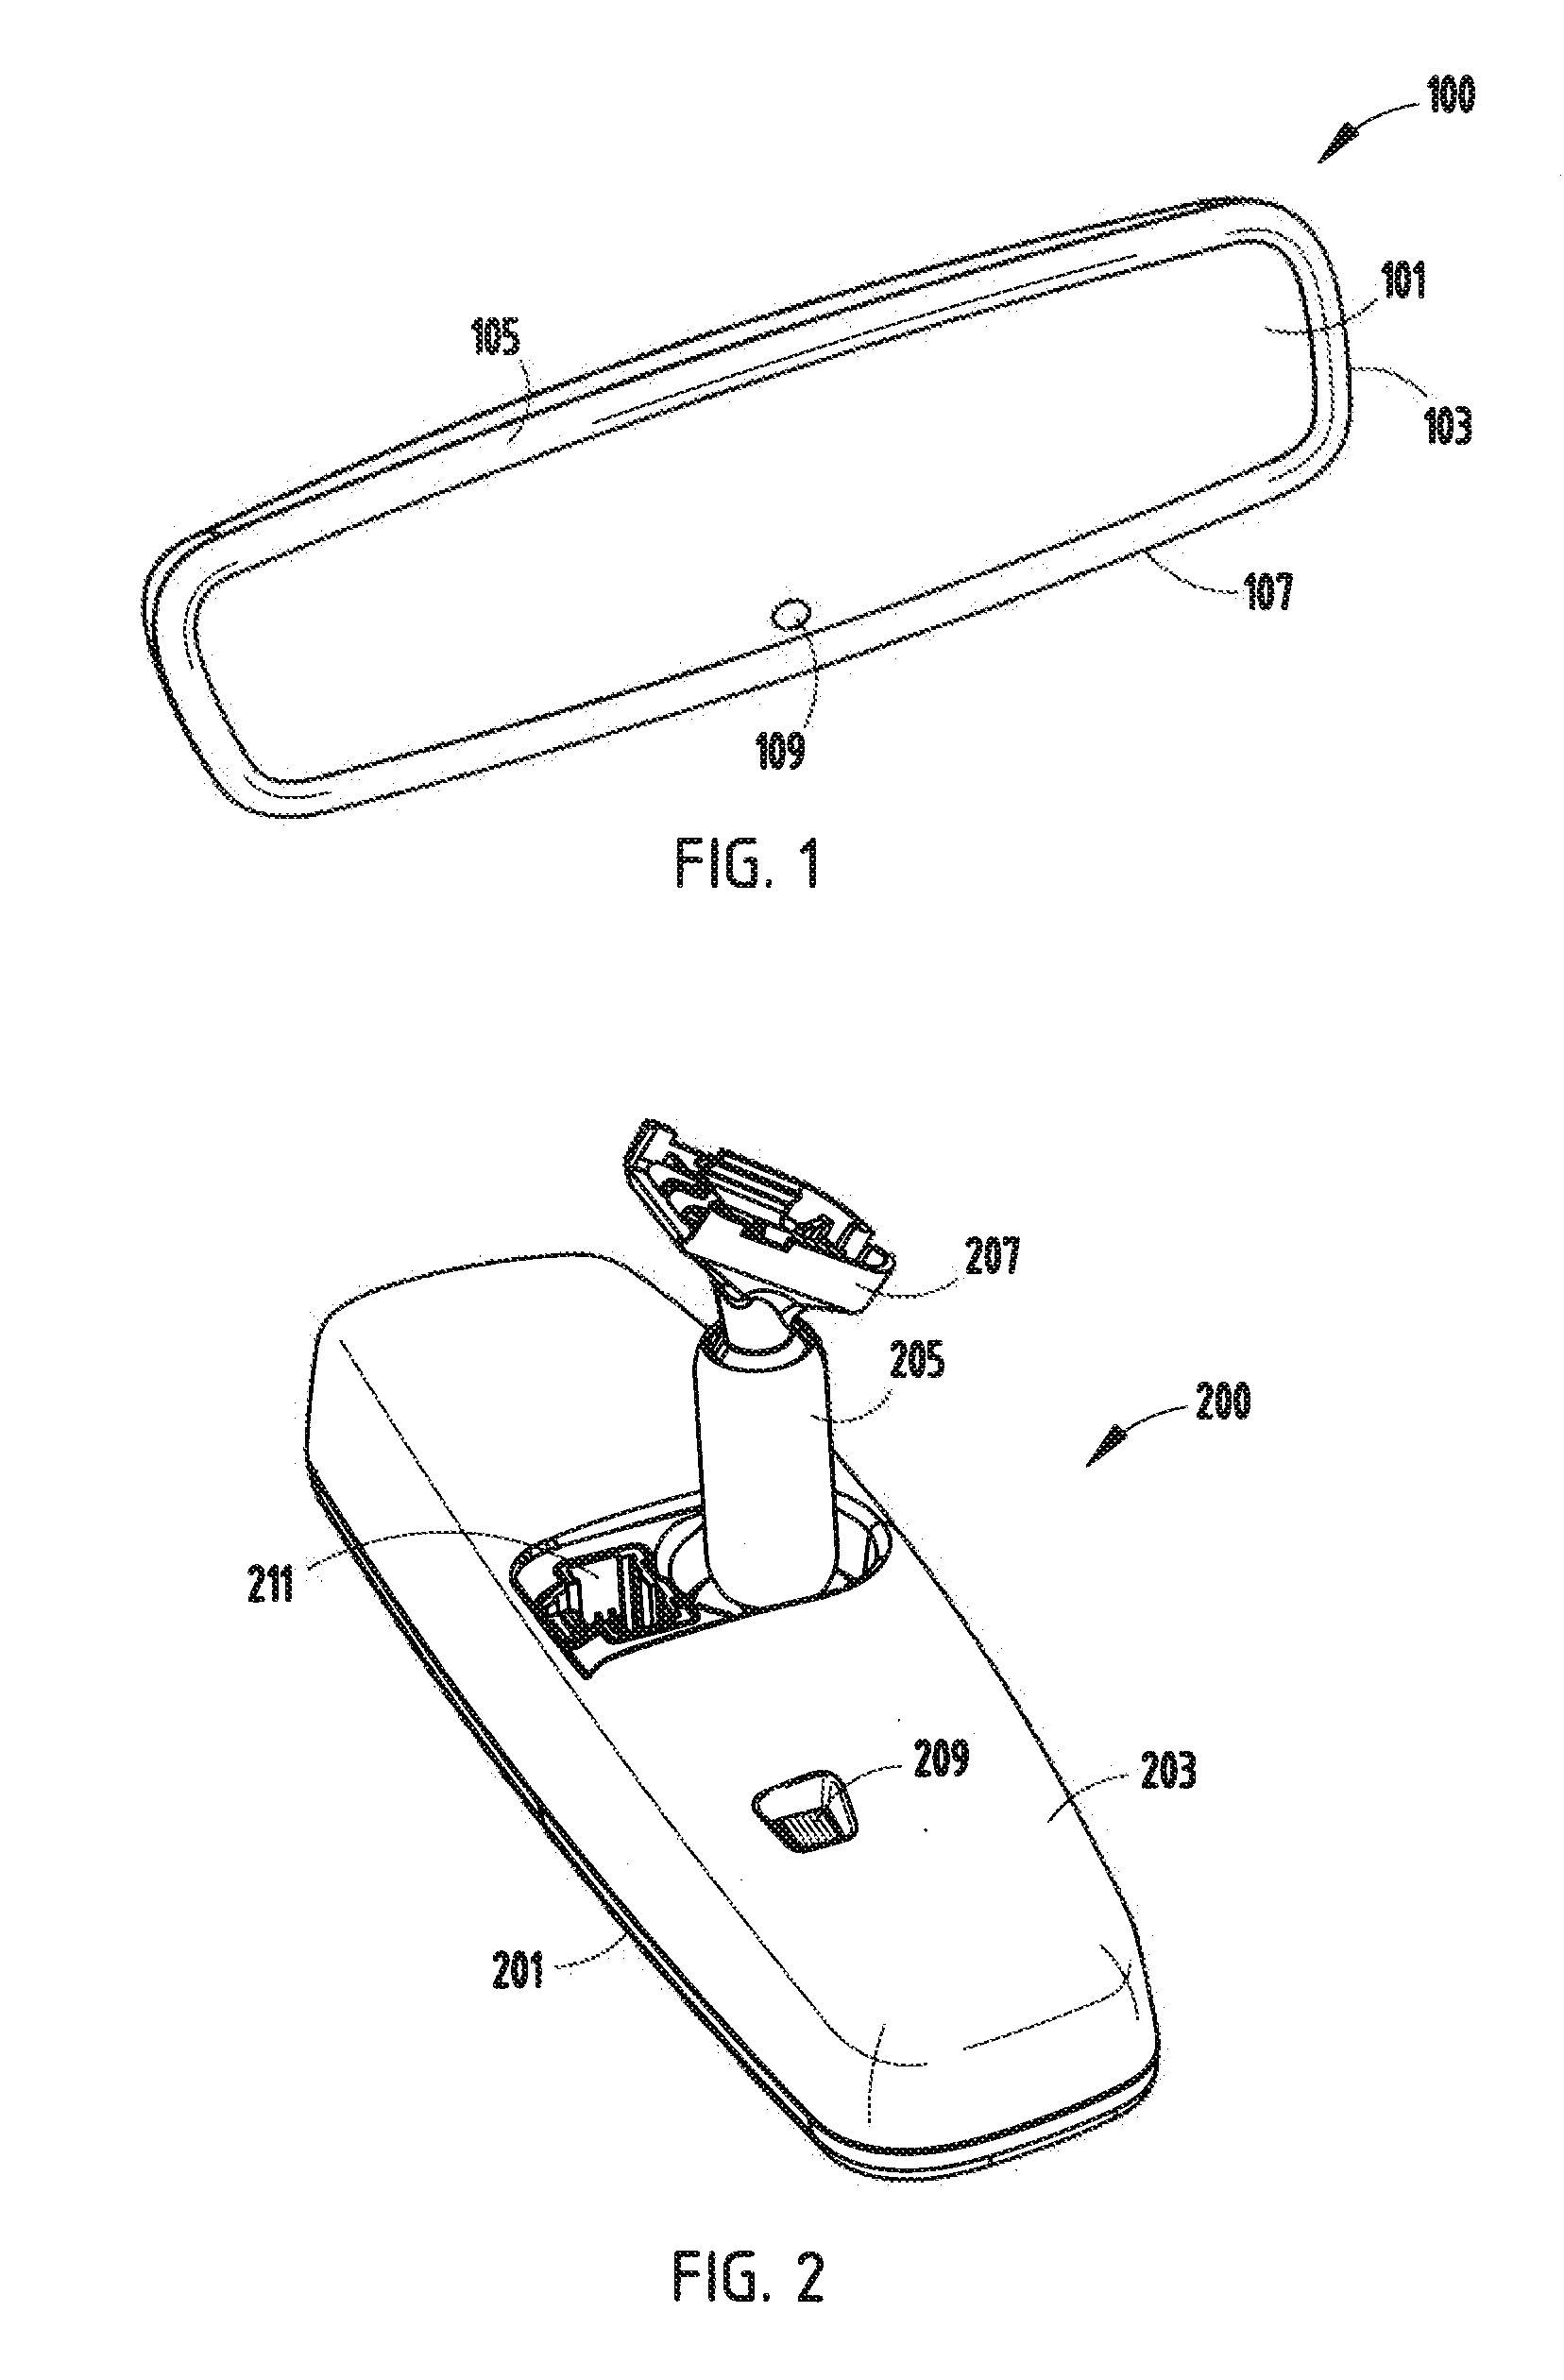 Multi-display mirror system and method for expanded view around a vehicle